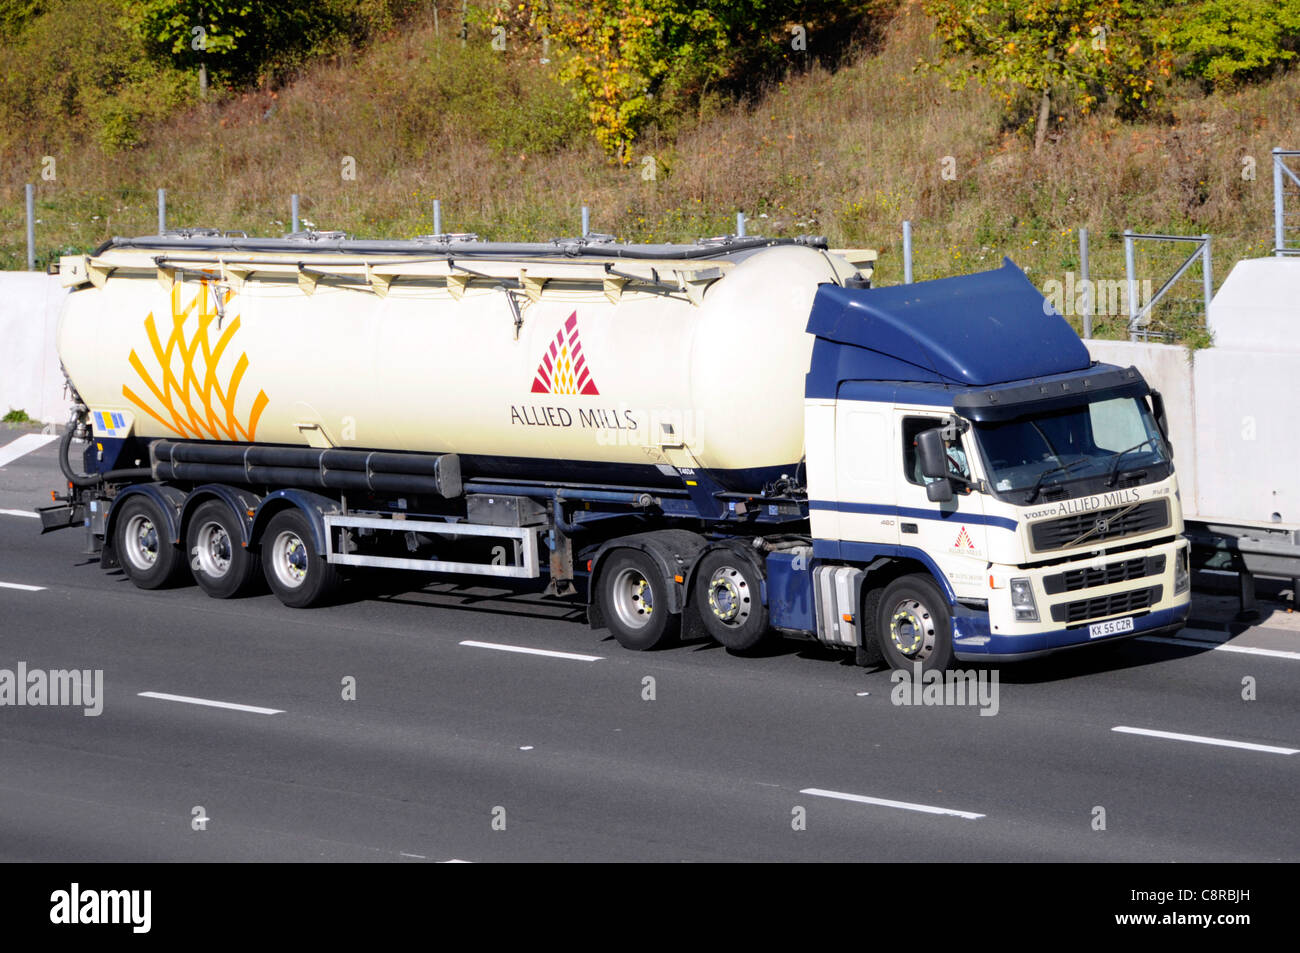 Allied Mills food supply chain articulated bulk flour carrier trailer and hgv lorry truck on M25 Motorway Essex England UK Stock Photo